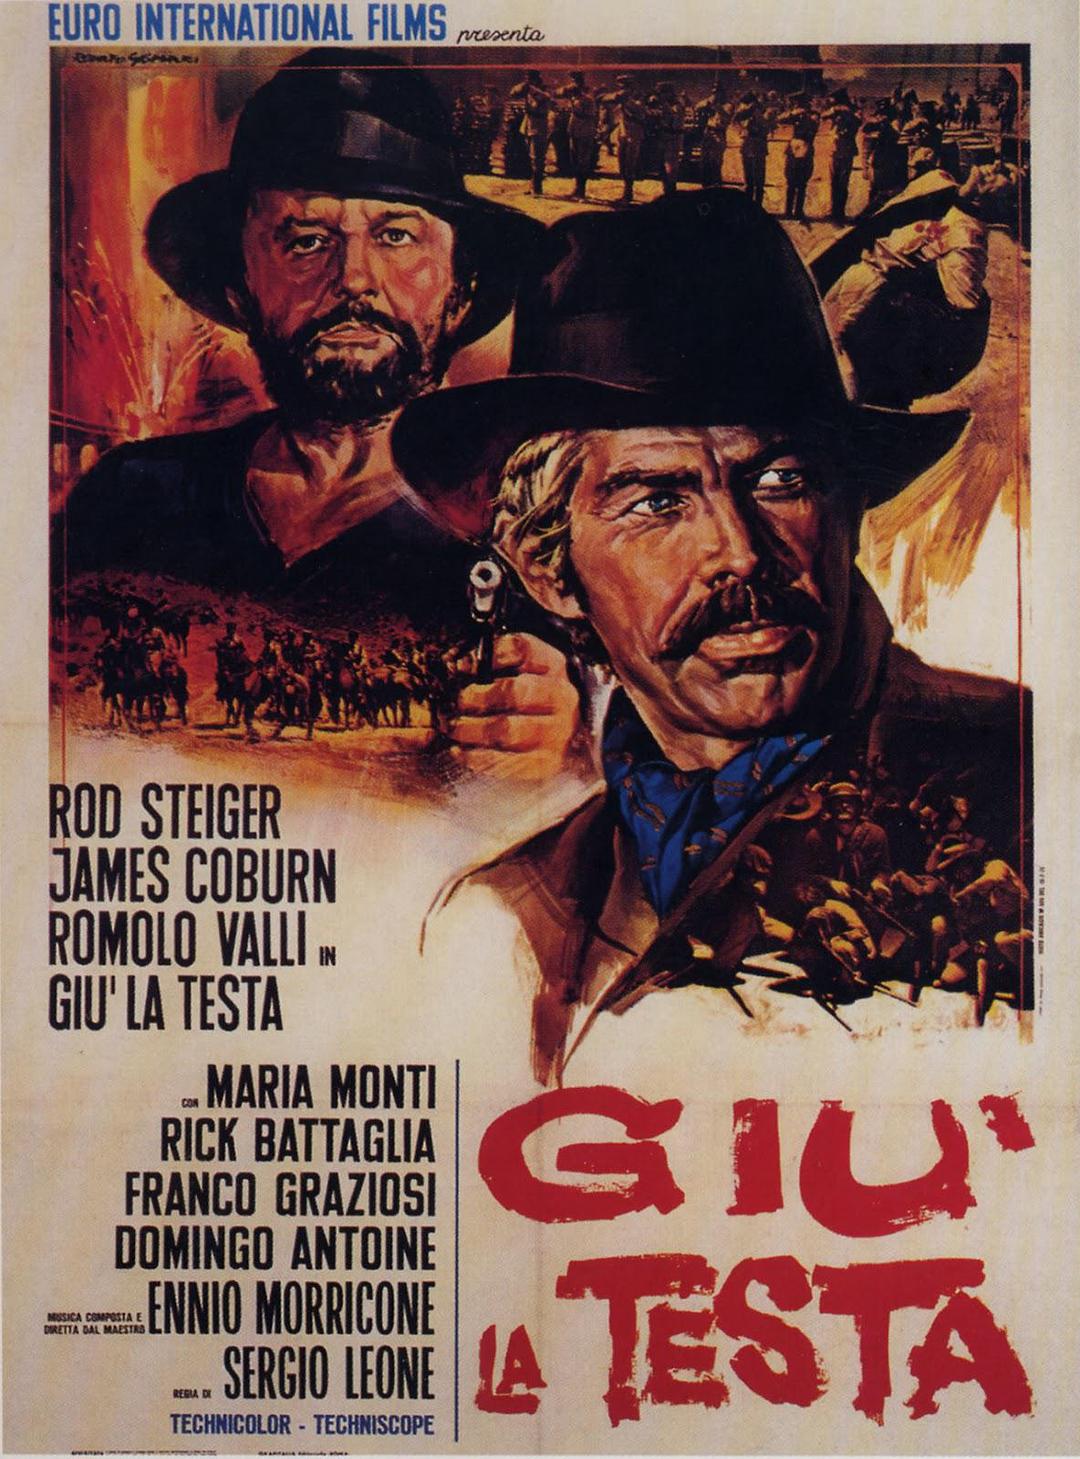  A.Fistful.of.Dynamite.1971.ITALIAN.1080p.BluRay.x264.DTS-FGT 13.49GB-1.png